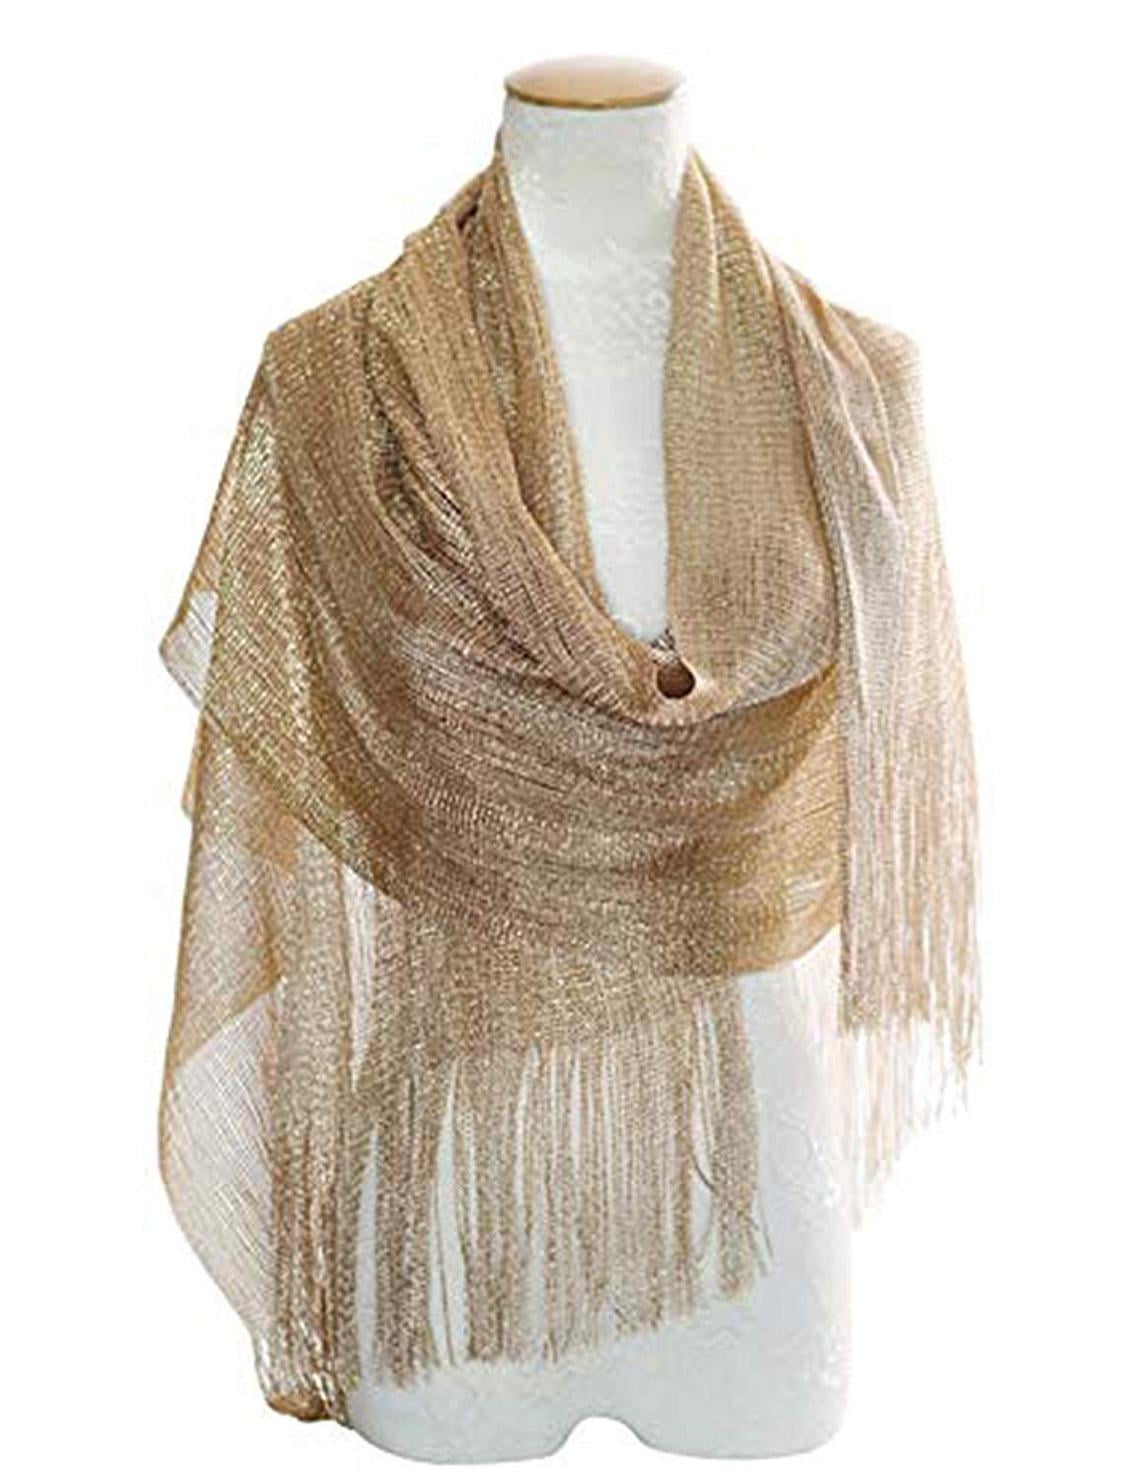 Bridesmaid Scarf Bridal Accessories Bridesmaids Gifts Beige Lace Scarf Shawl For Women Infinity Scarf Lace Scarf Wedding Scarf